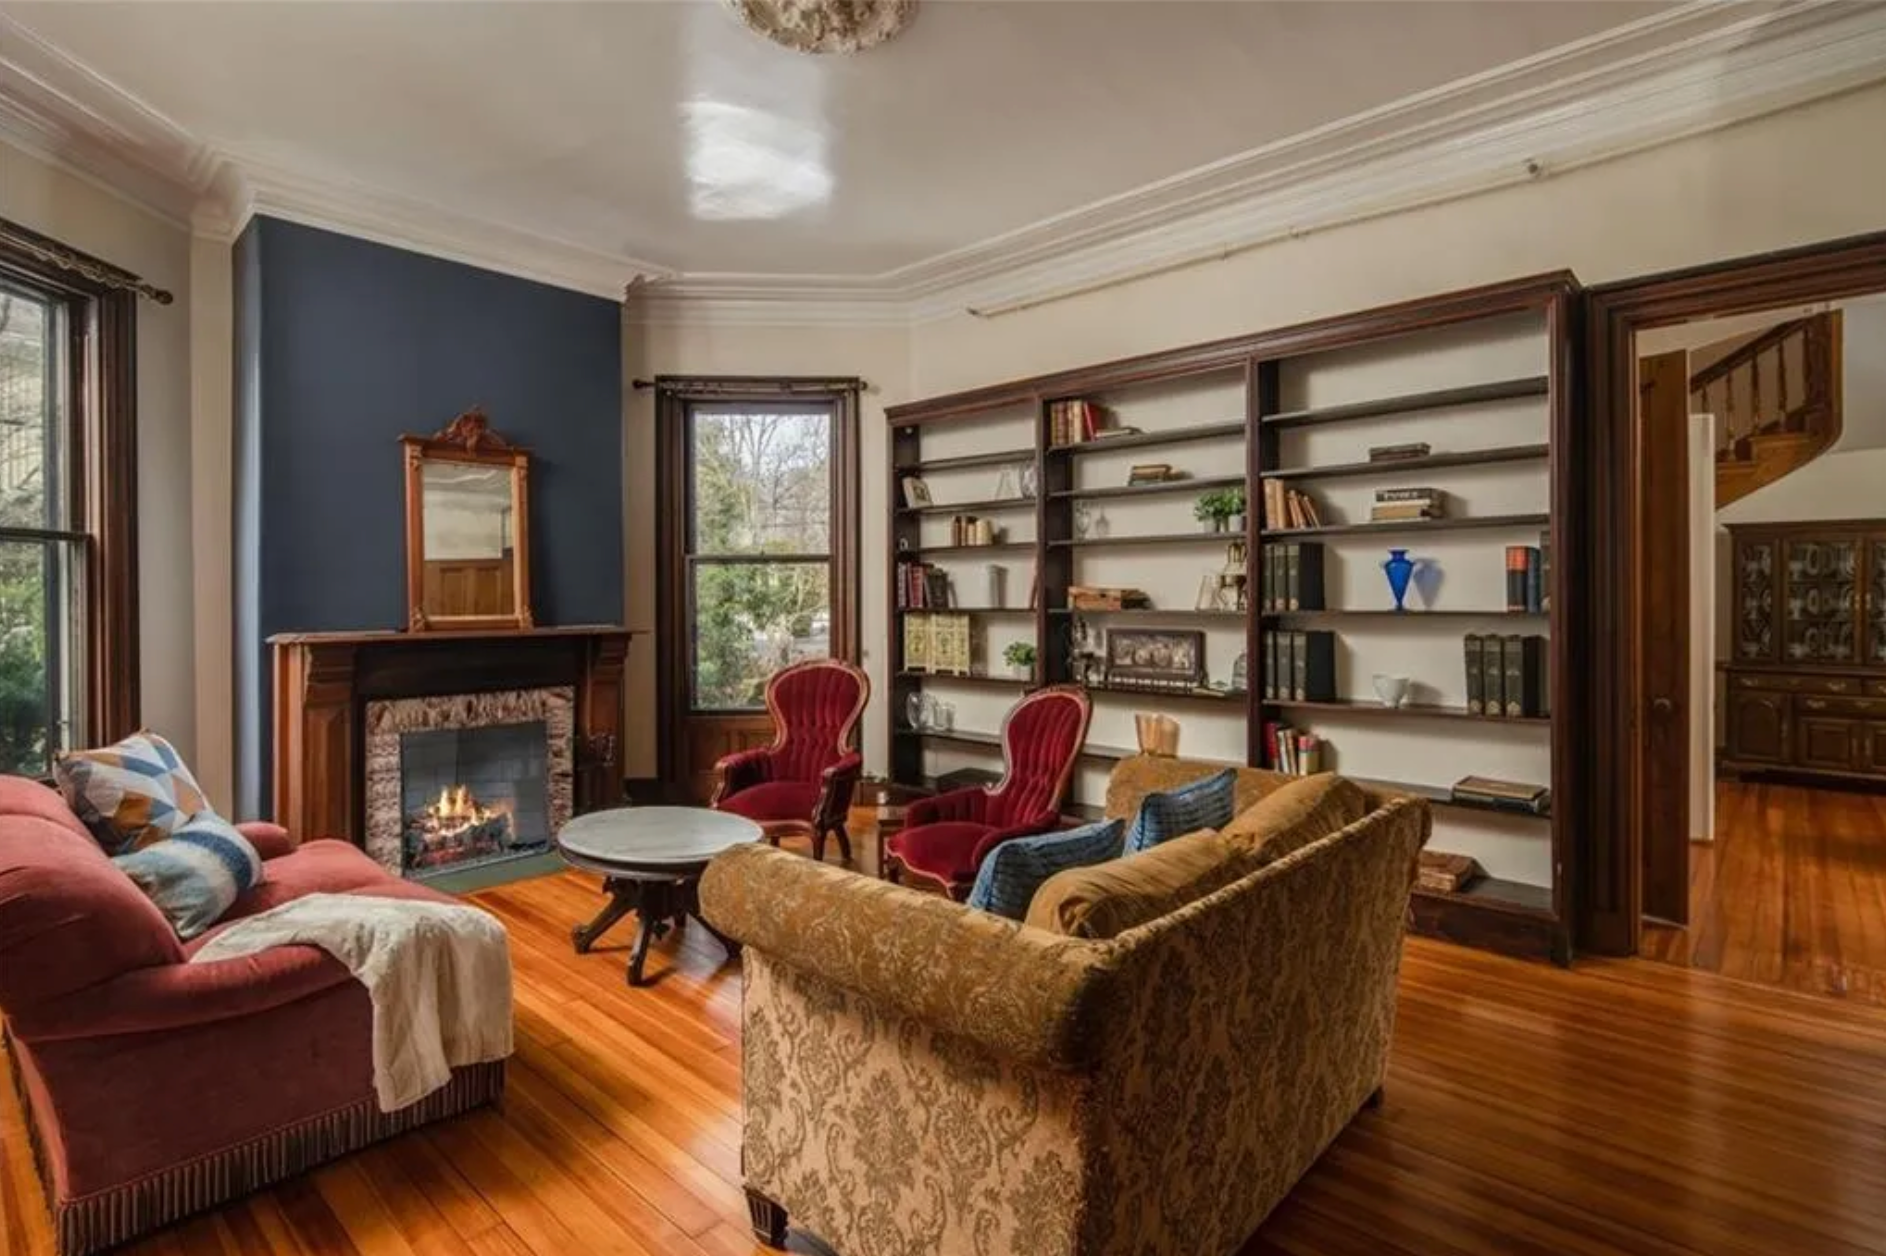 The living room has built-in shelves and a dark blue accent wall as well as a gas fireplace and hardwood floors.